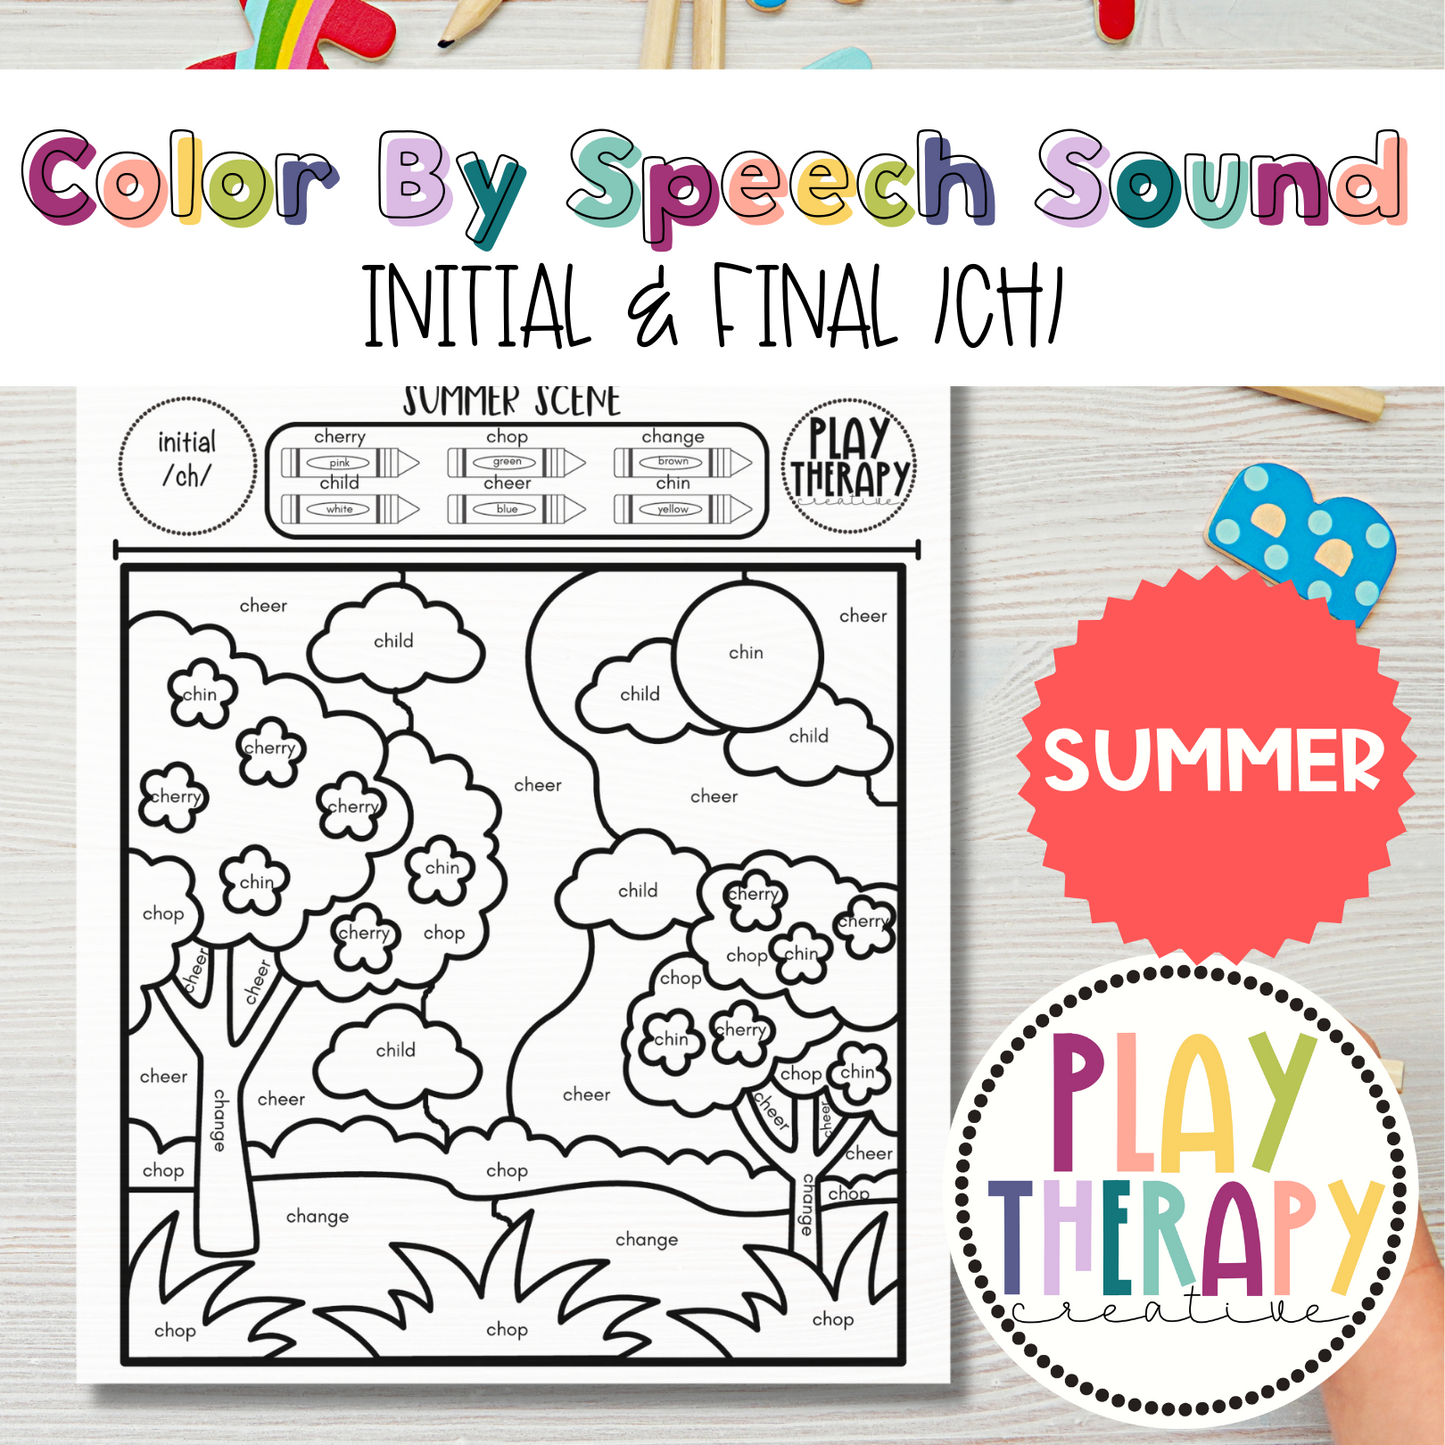 /ch/ Sound Summer Themed Color-by-Speech-Sounds for Speech Therapy